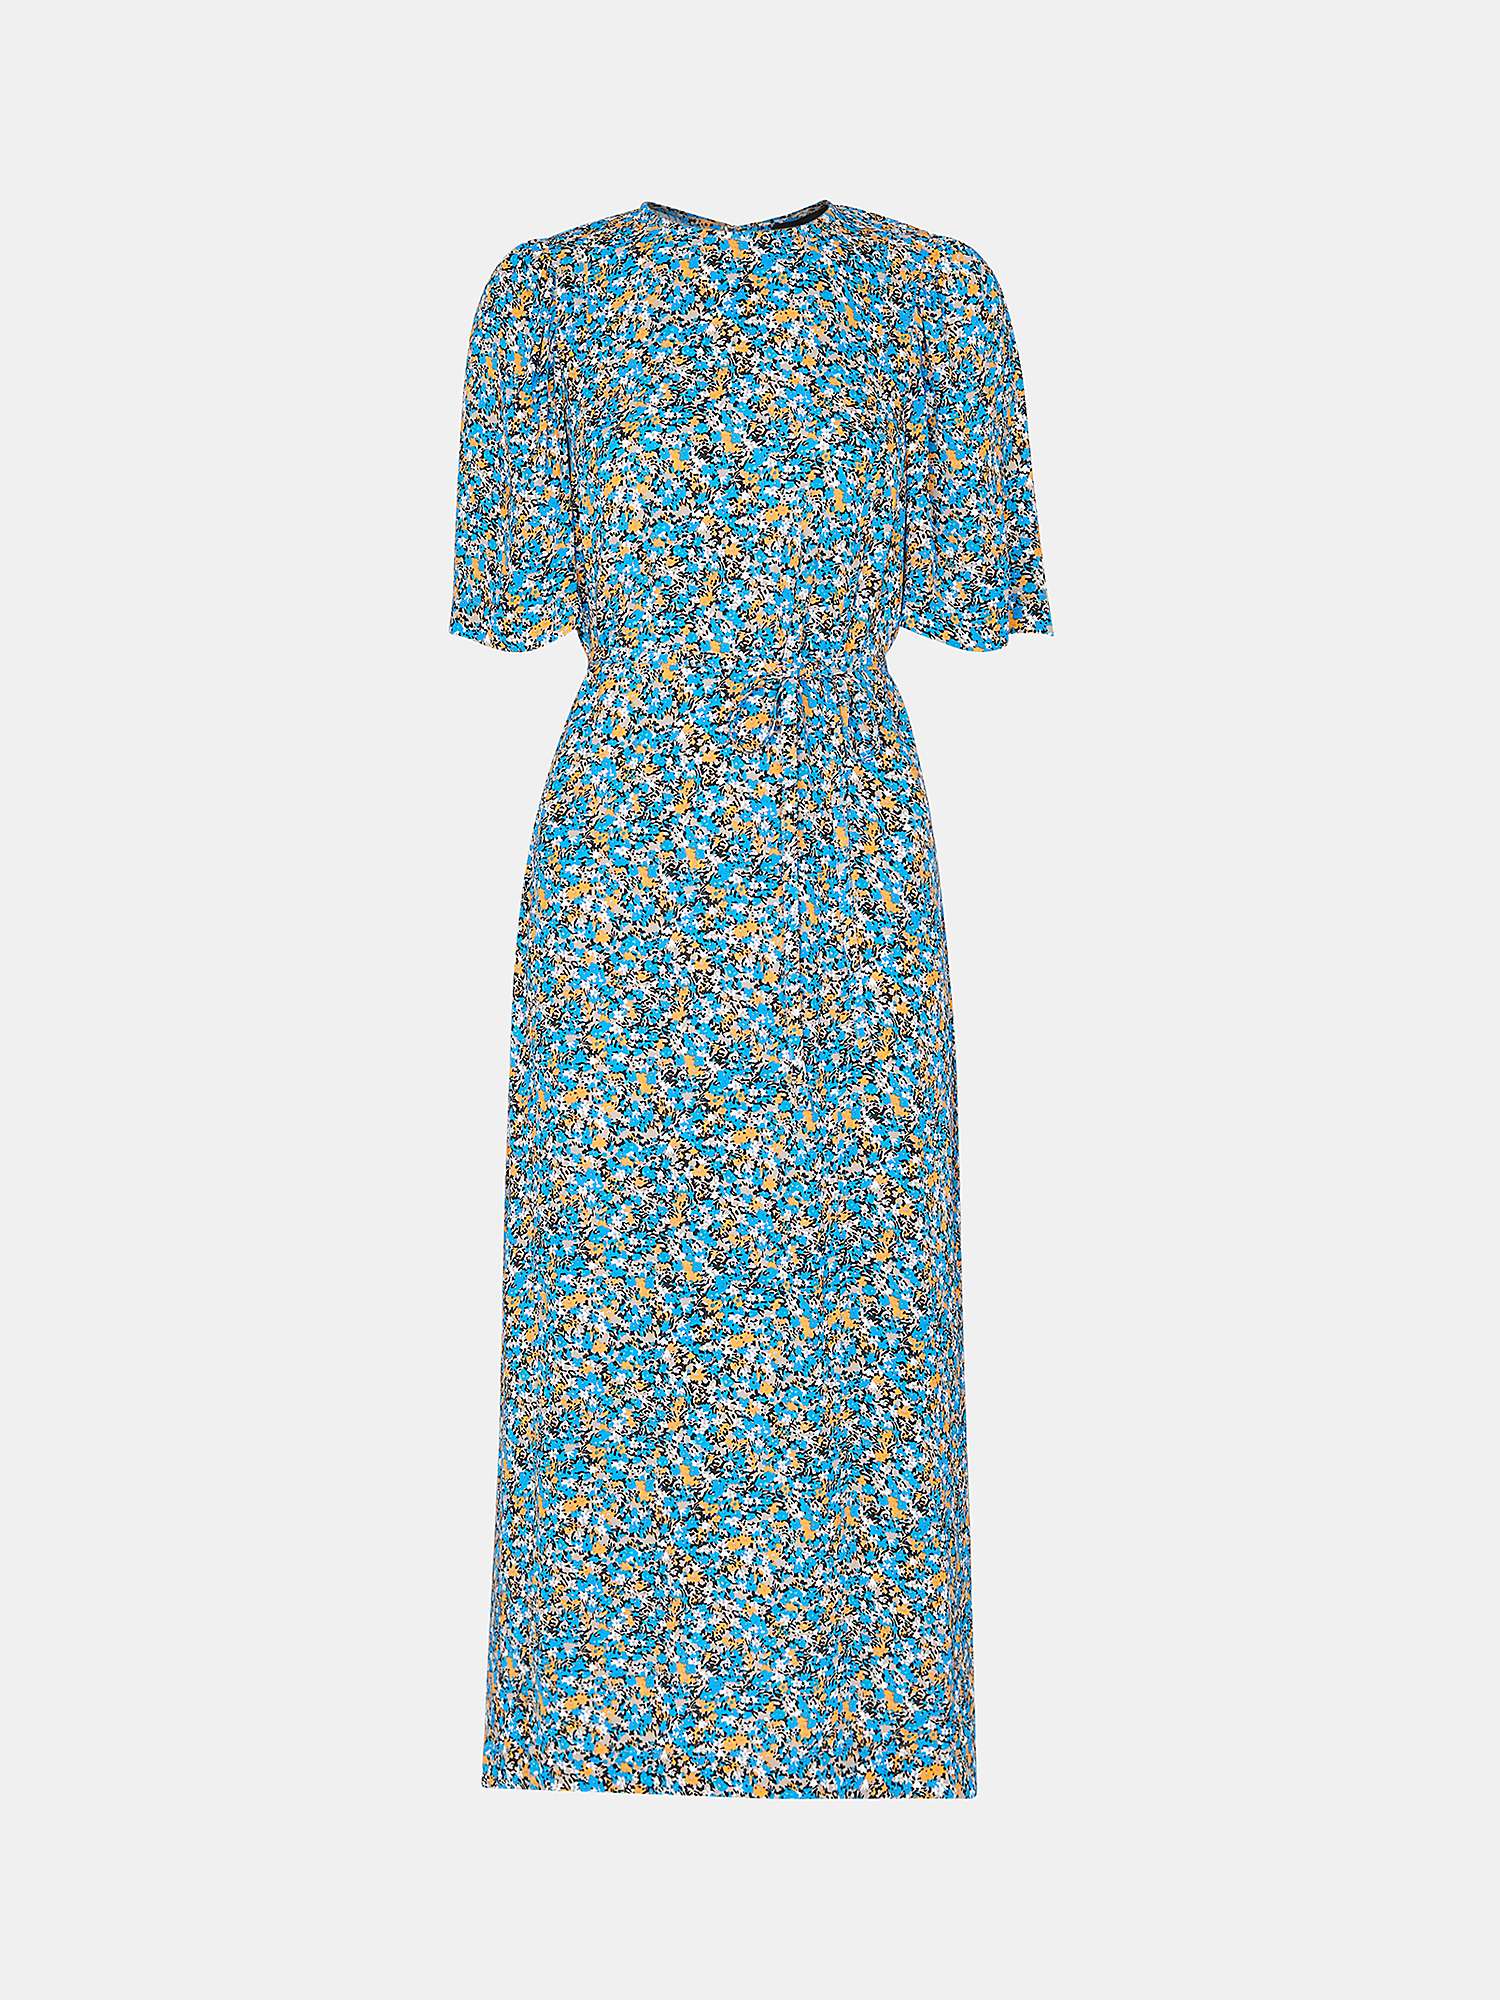 Buy Whistles Ditsy Bouquet Midi Dress, Multi Online at johnlewis.com